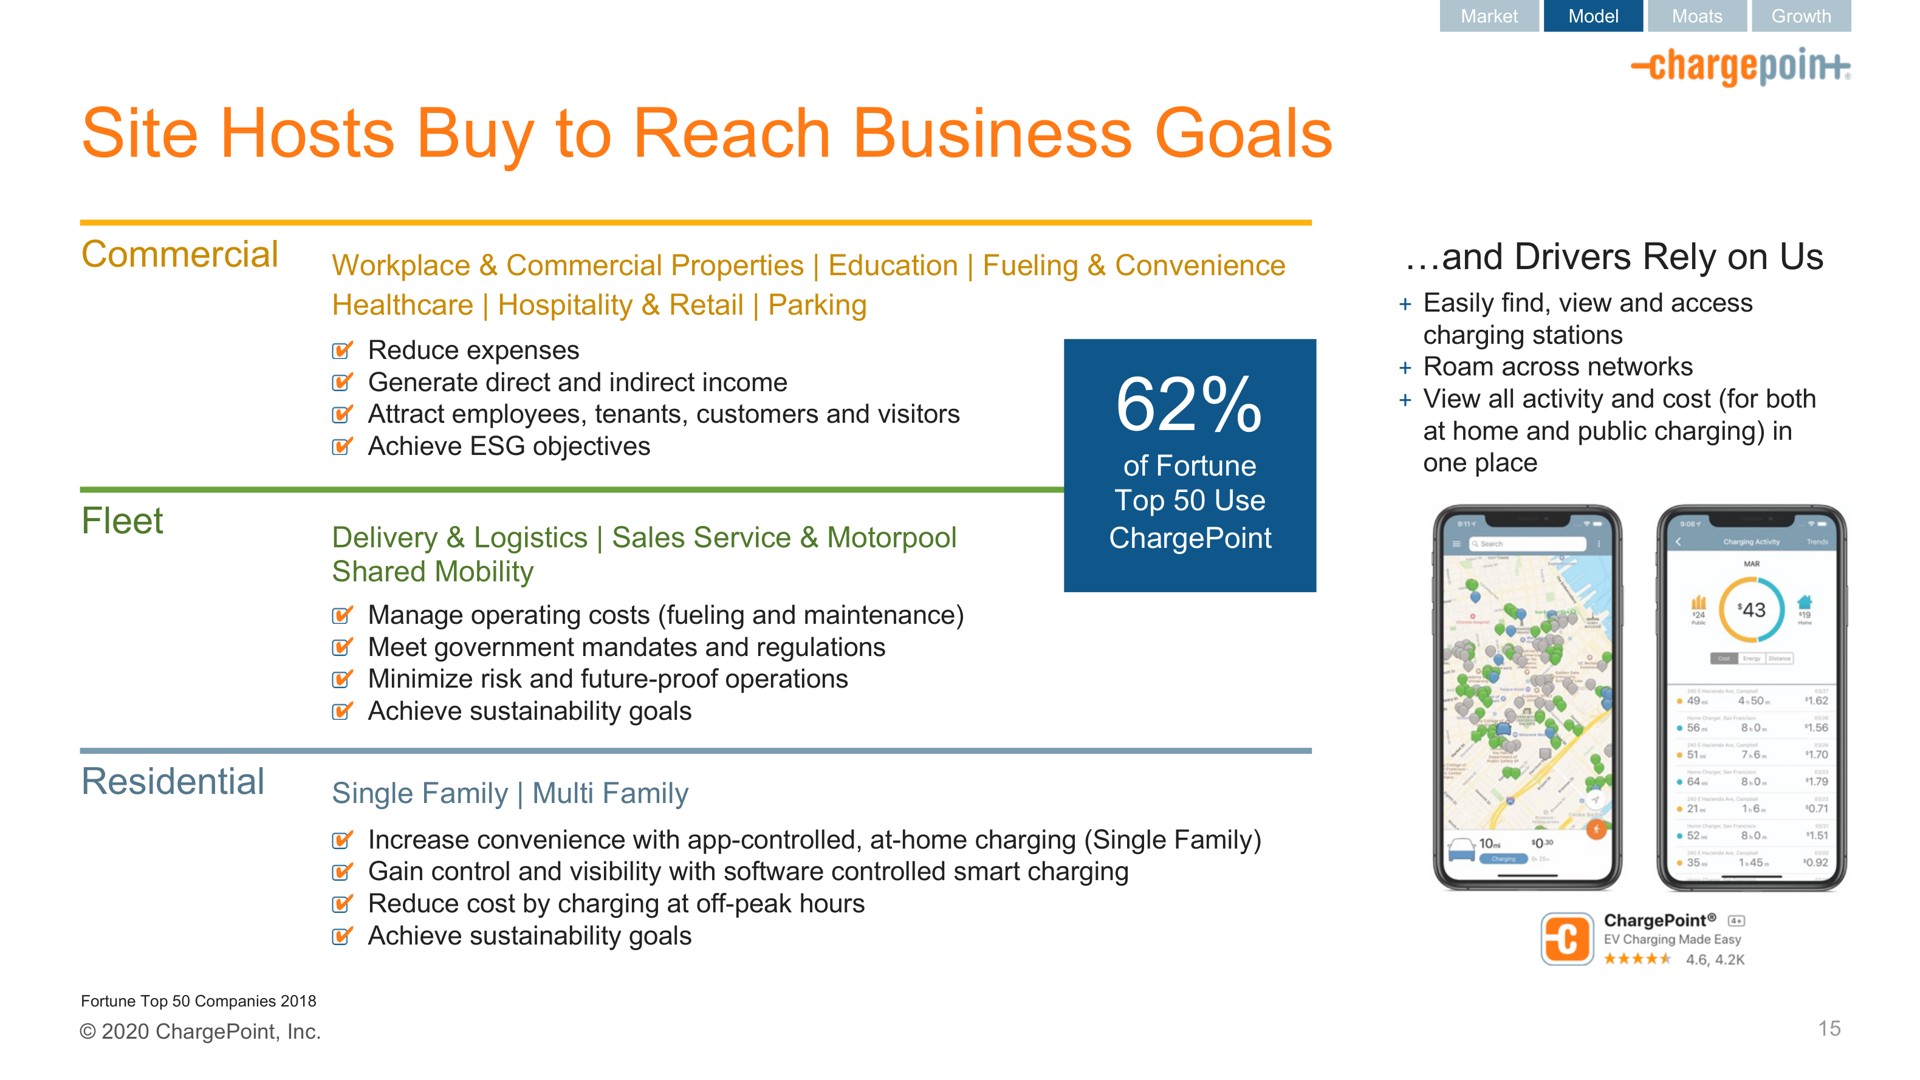 site hosts buy to reach business goals | ChargePoint